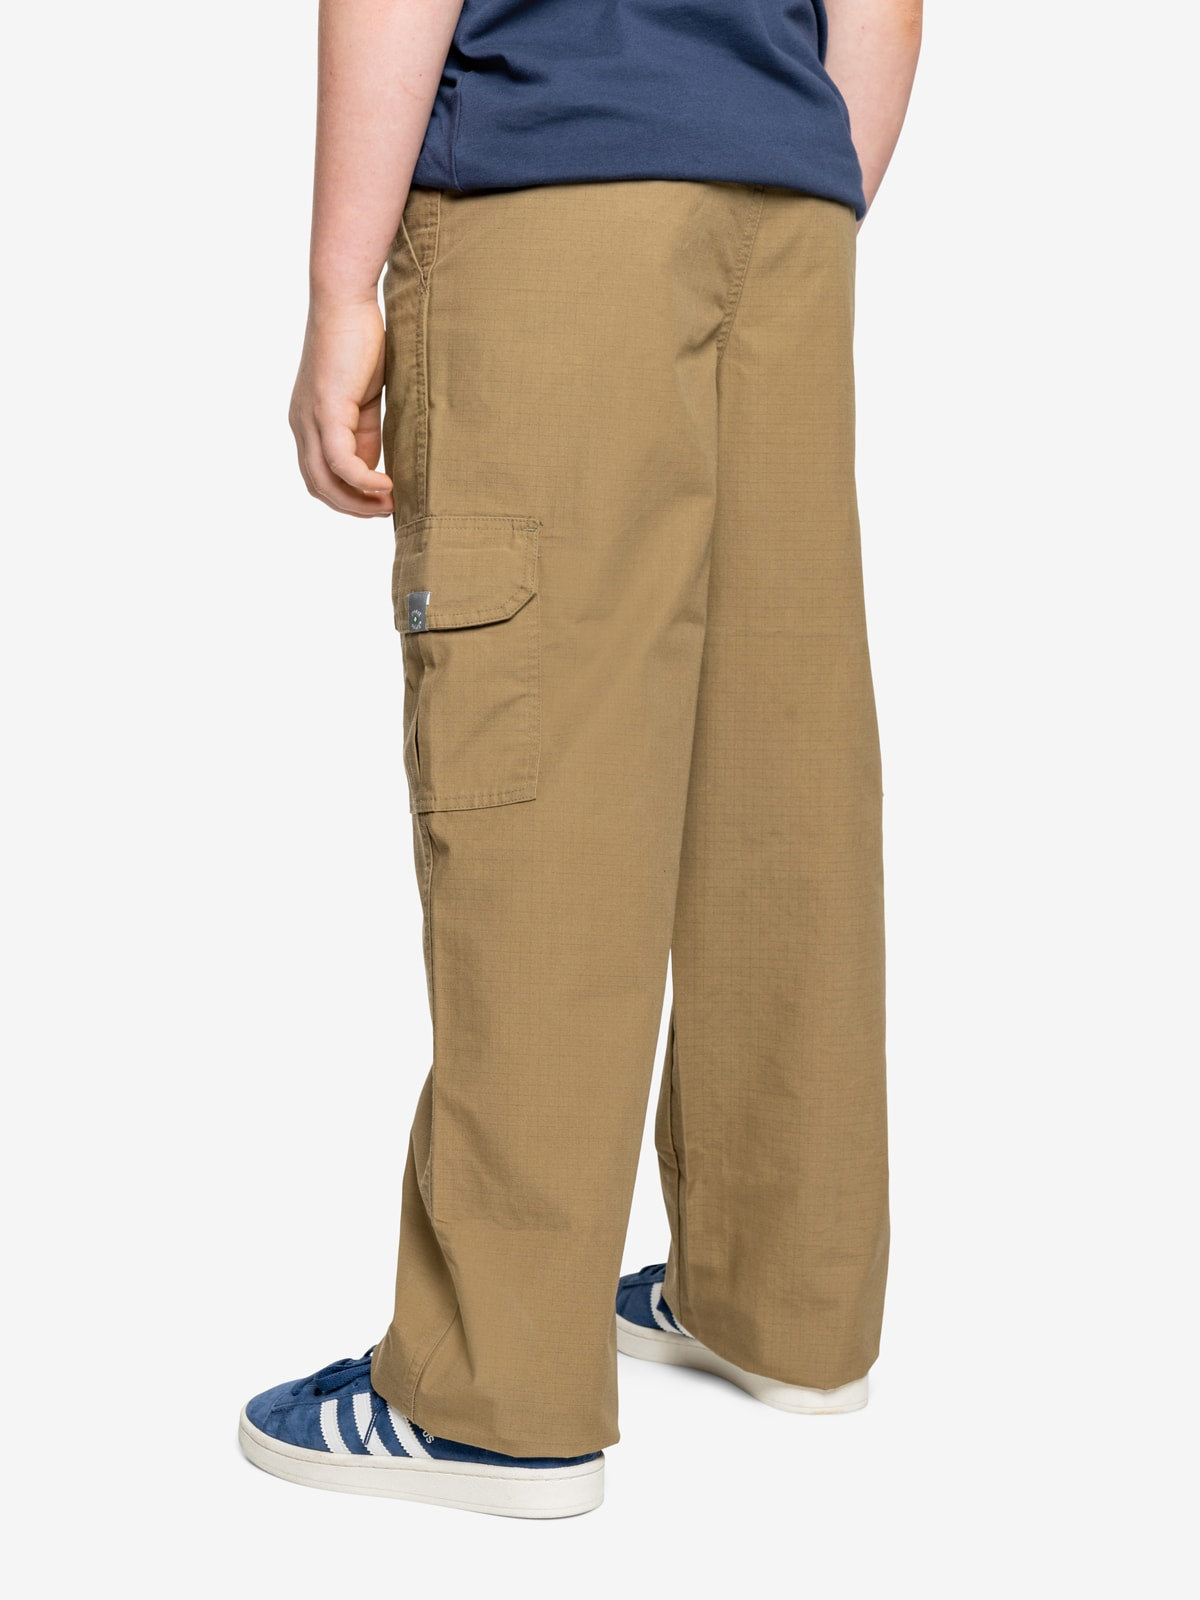 Insect Shield Boys' Performance Ripstop Pants